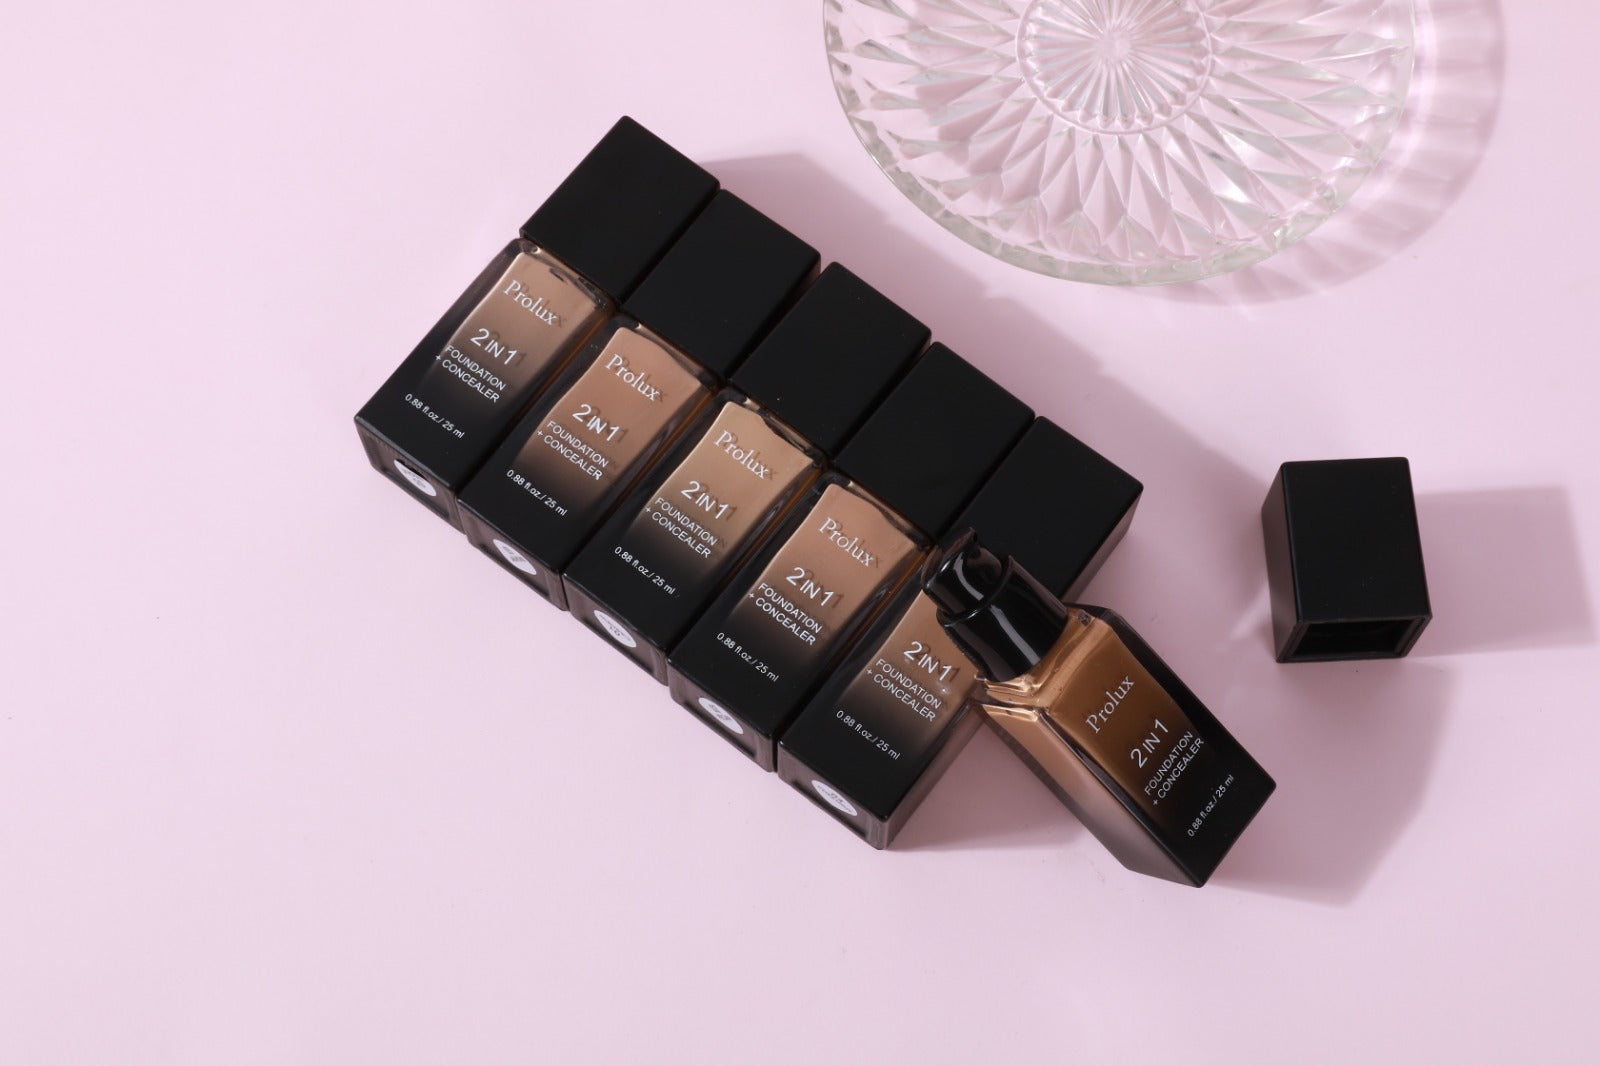 beauty foundation and concealer for Woman